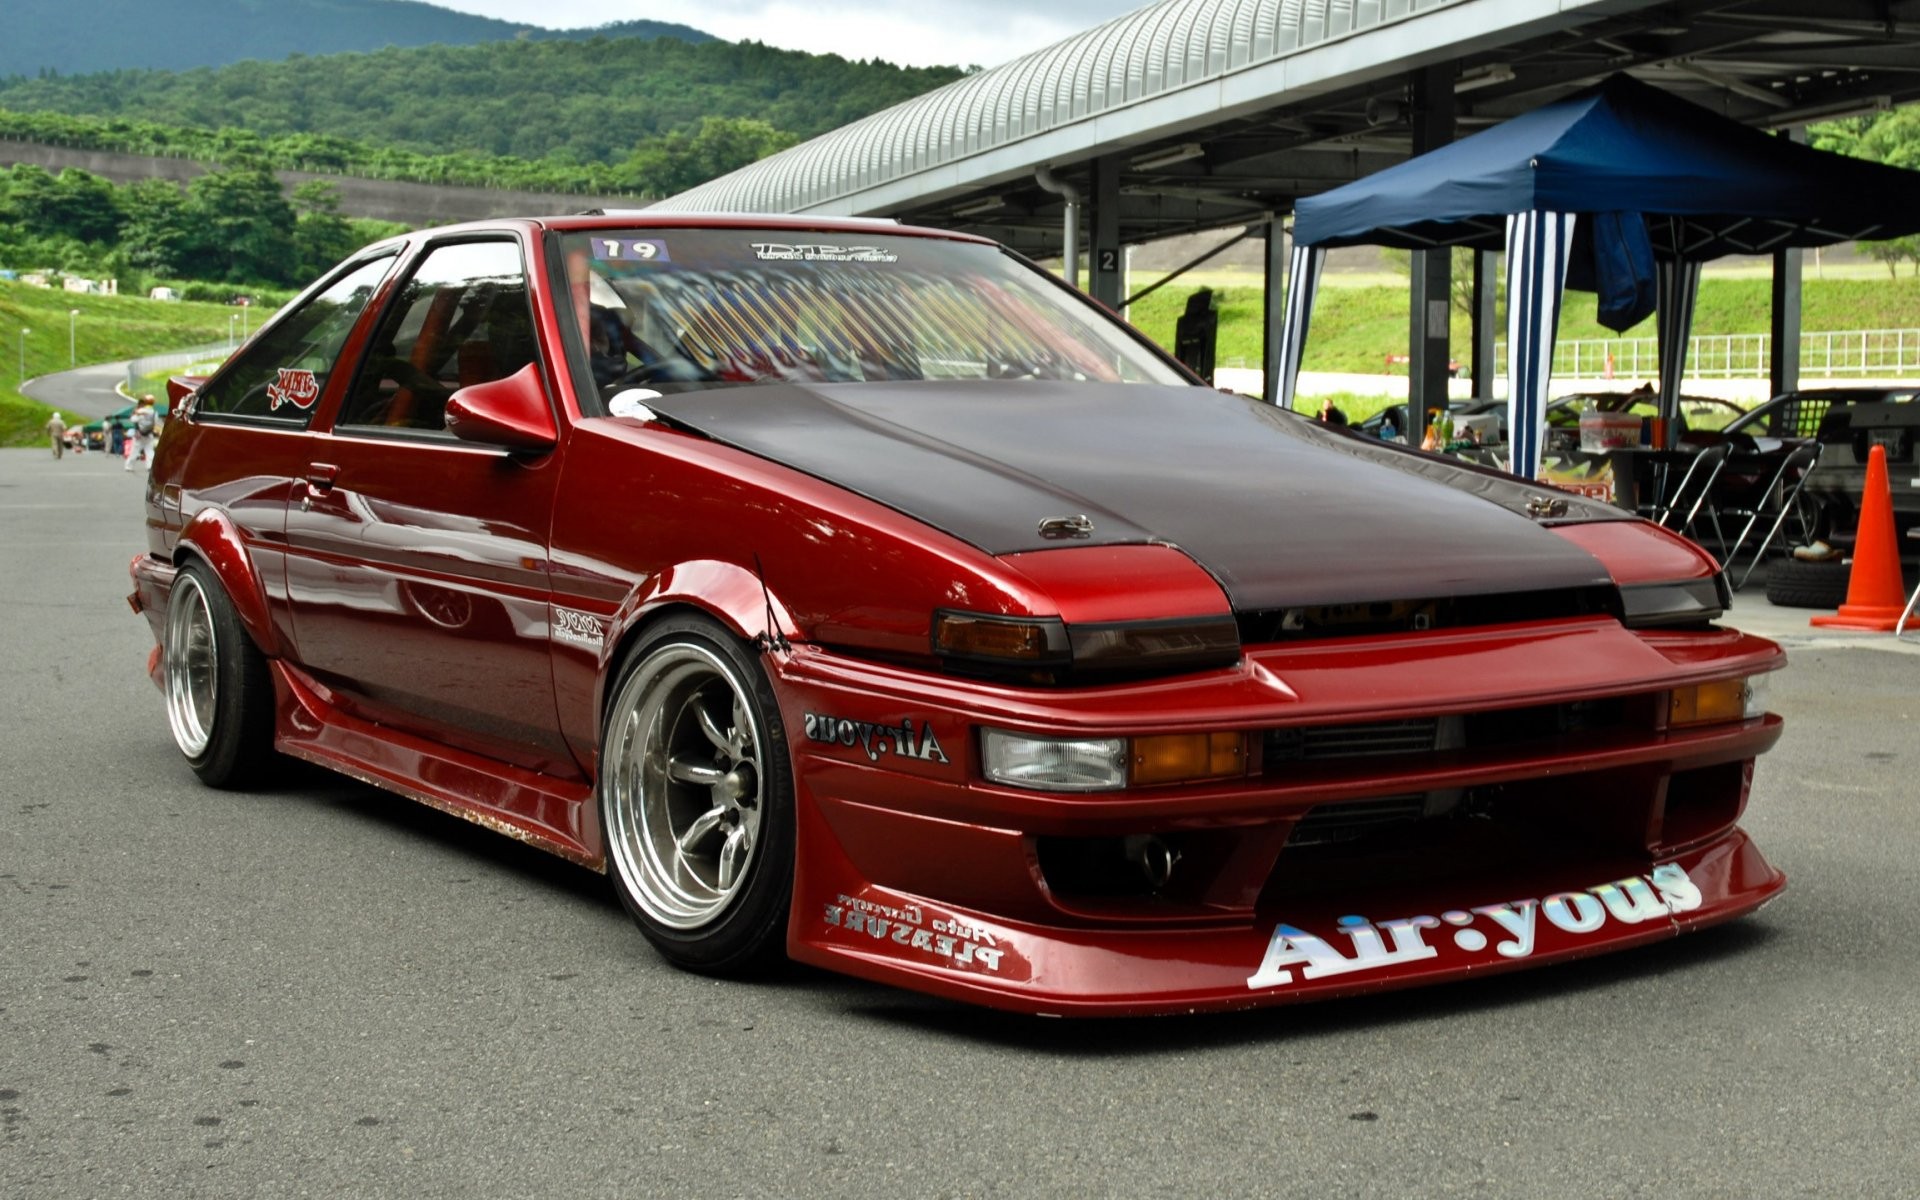 General 1920x1200 Japanese cars stance (cars) Toyota Toyota AE86 car pop-up headlights vehicle red cars